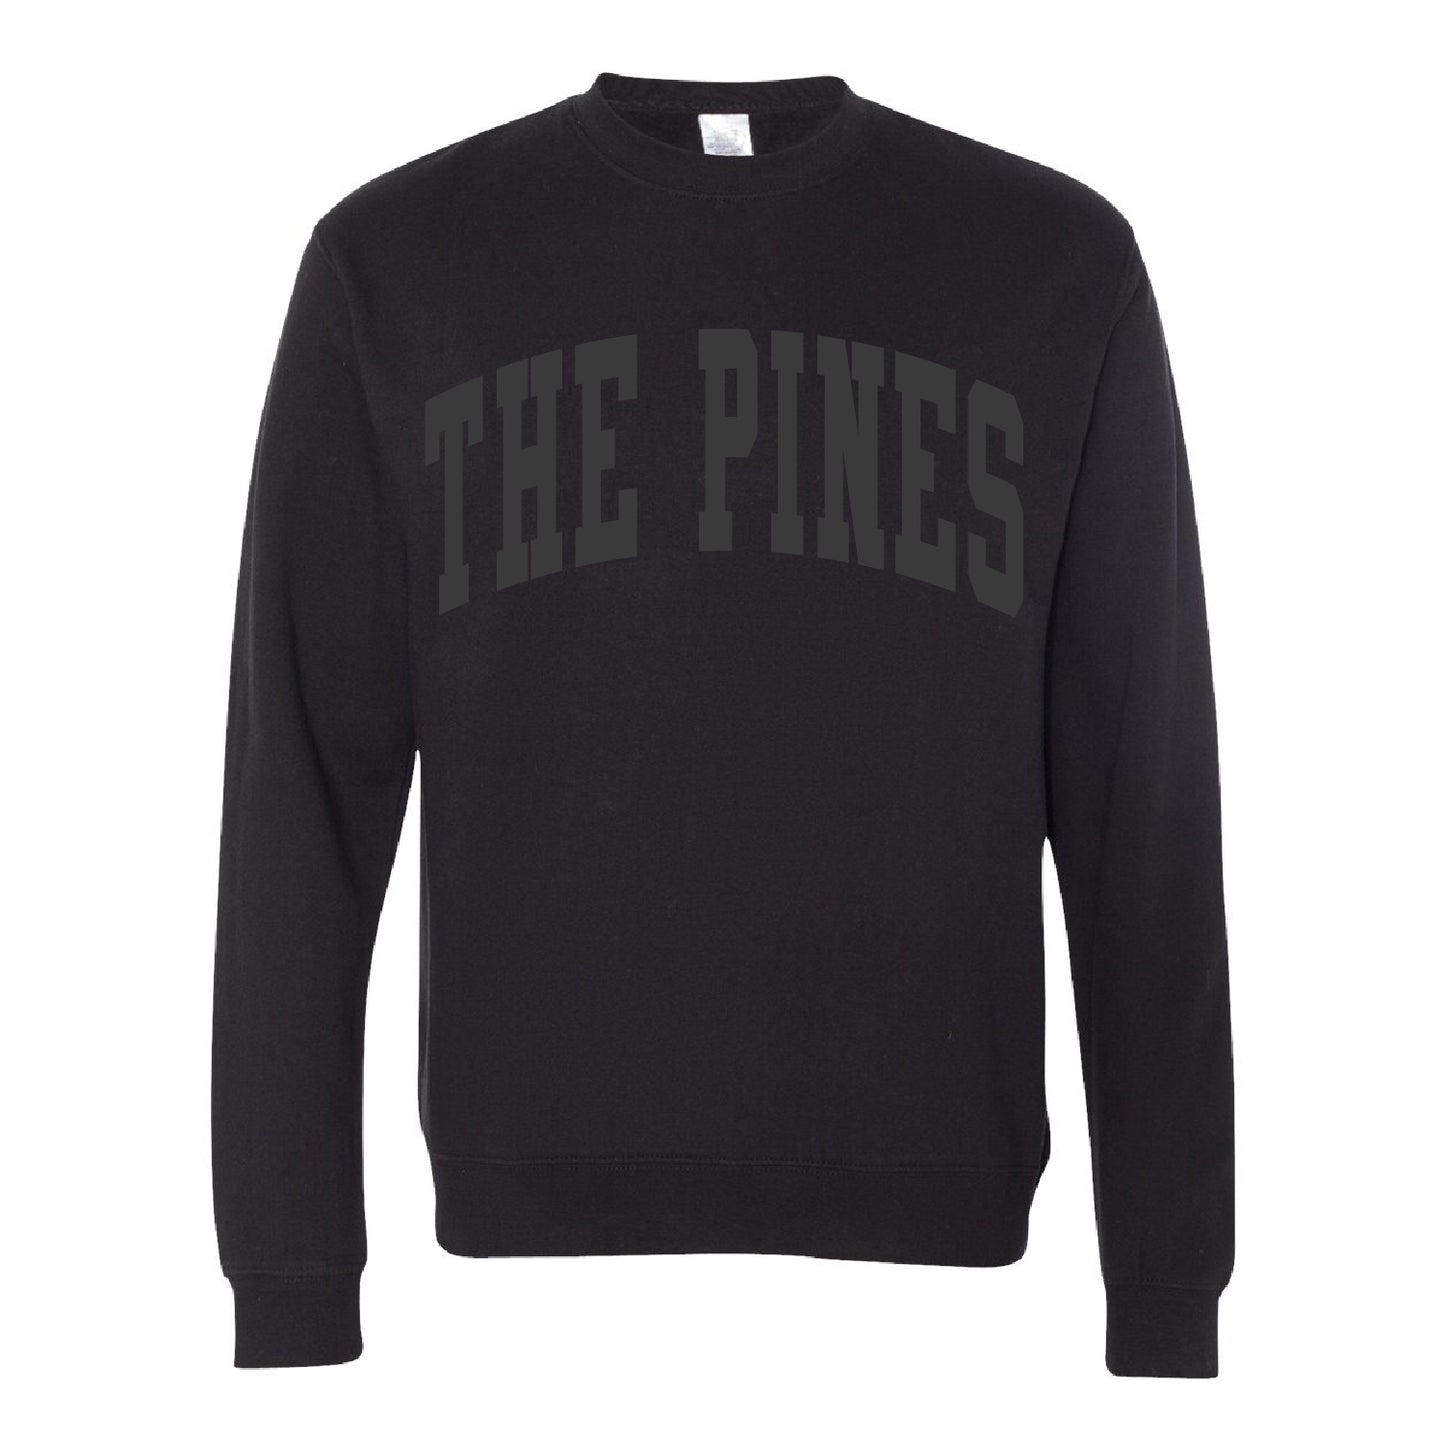 The Pines - PI22663